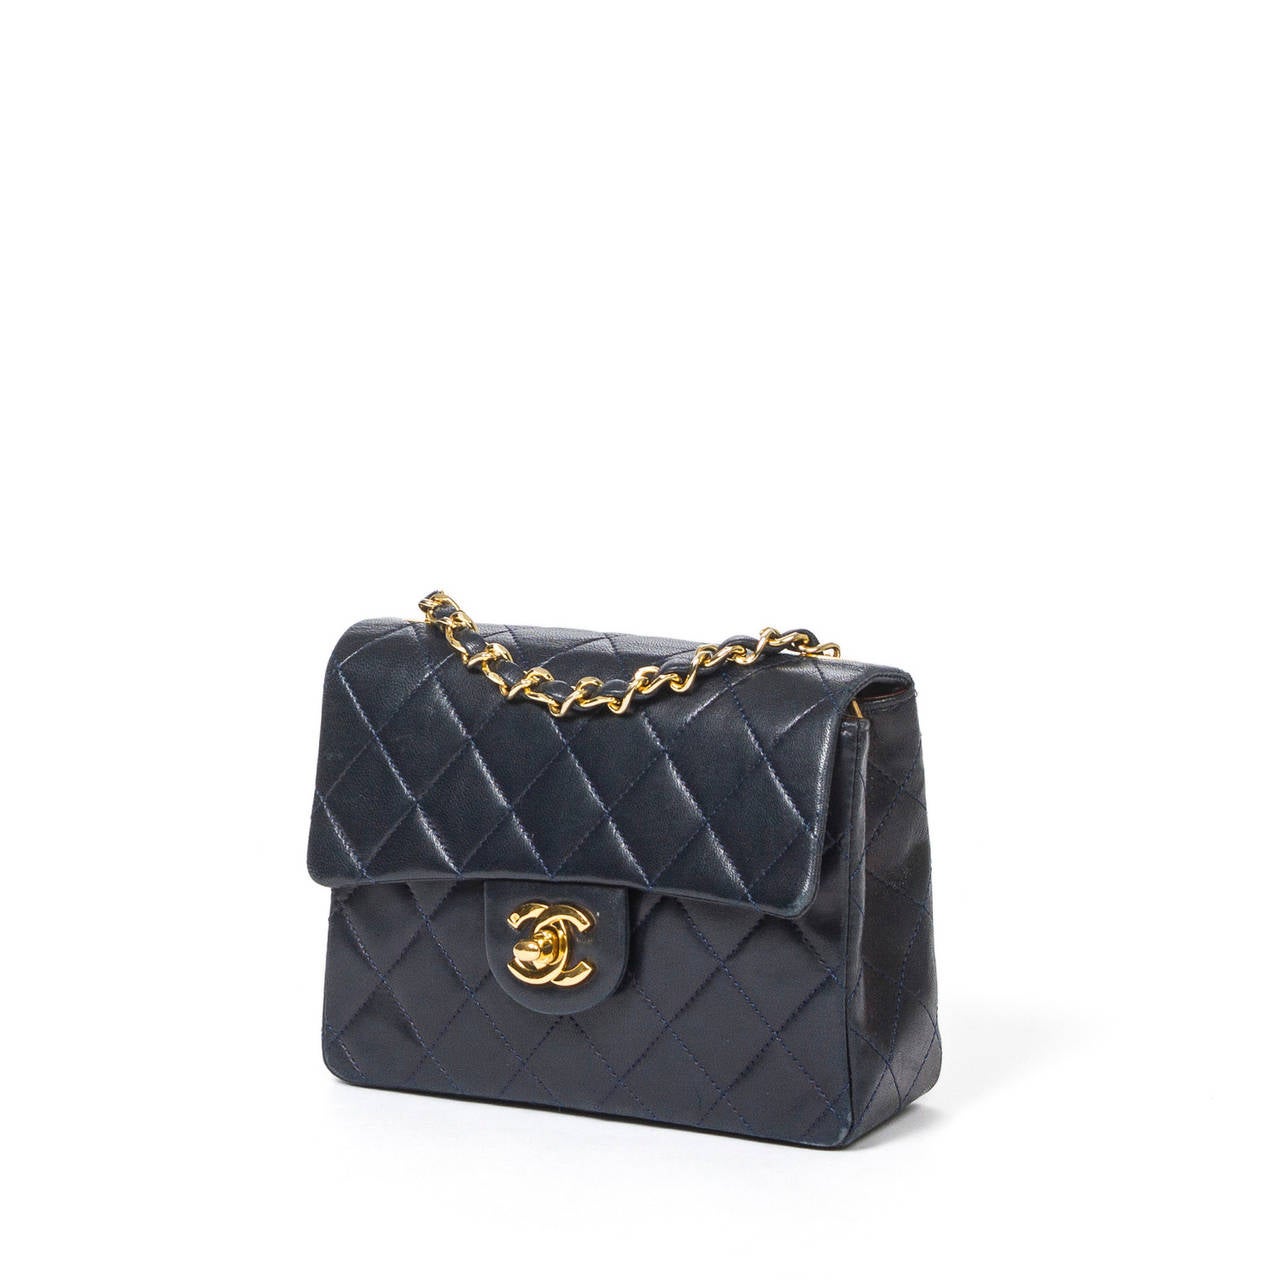 Mini Classic flap bag in navy blue quilted leather with chain strap interlaced with leather, CC turnlock and gold tone hardware. Burgundy leather lined interior with one zip pocket and one slip pocket. Authenticity card included.  Excellent